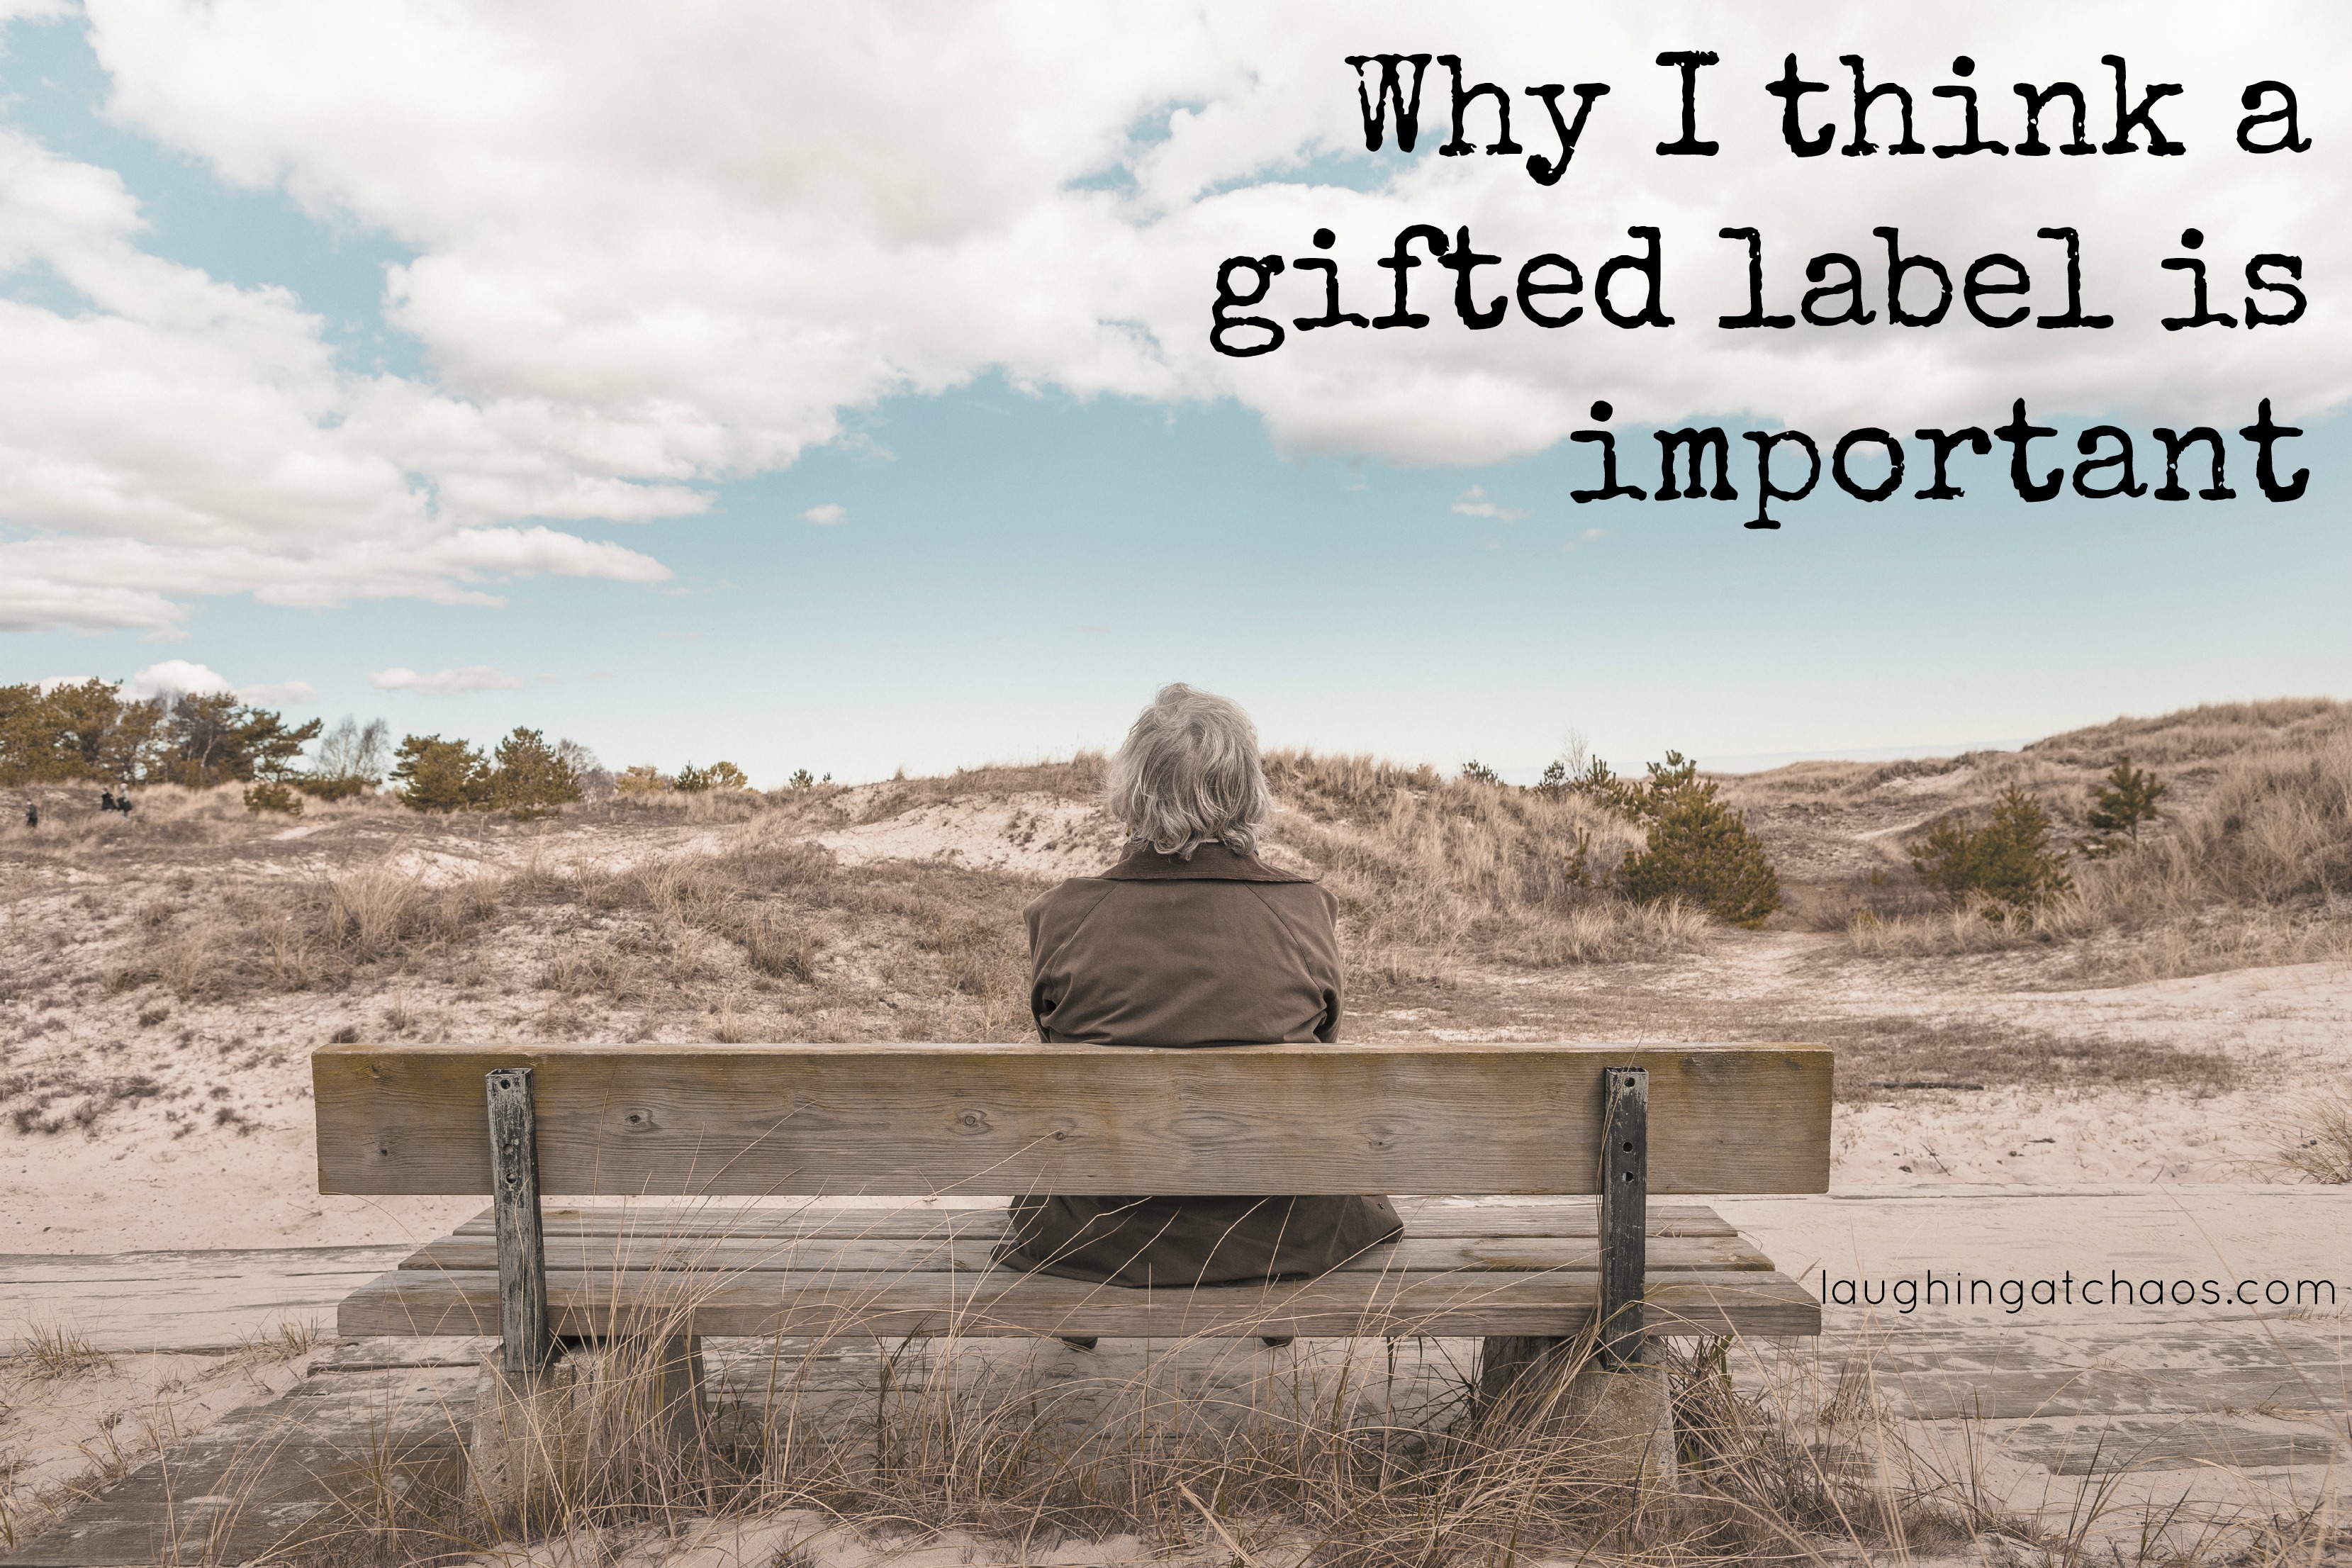 Why I think a gifted label is important